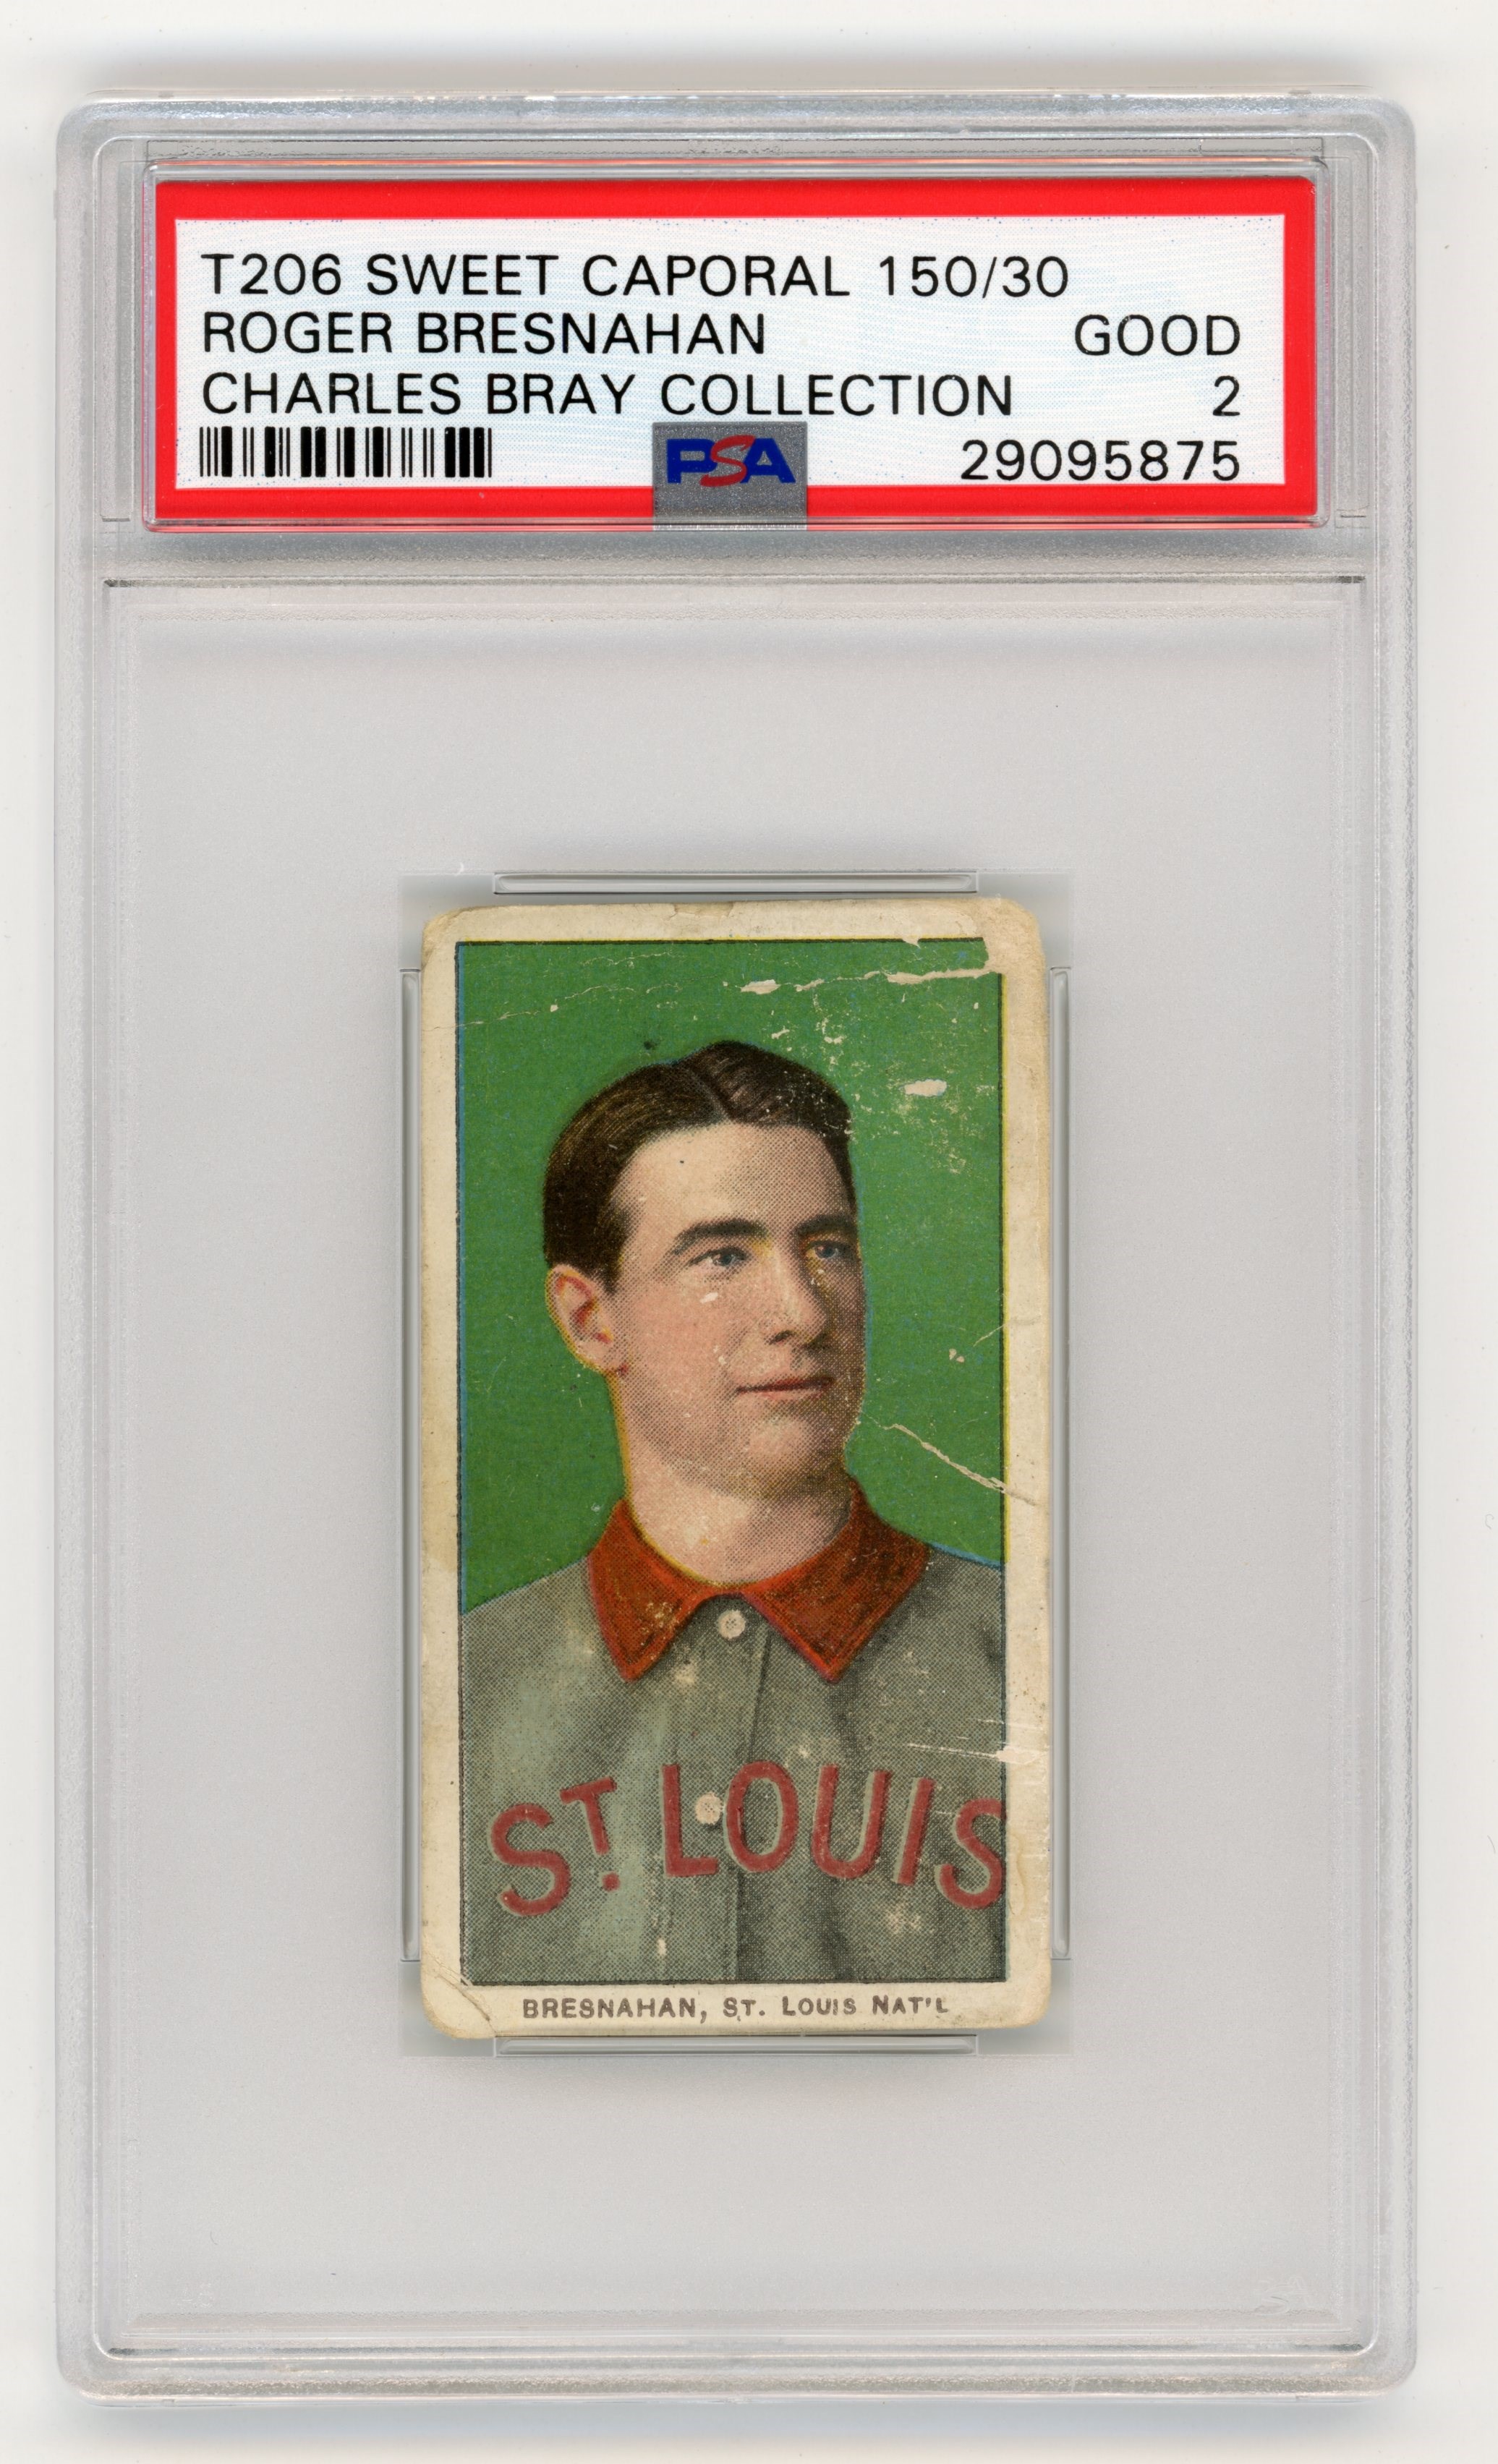 Baseball and Trading Cards - T206 Sweet Caporal 150/30 Roger Bresnahan PSA 2 From Charles Bray Collection